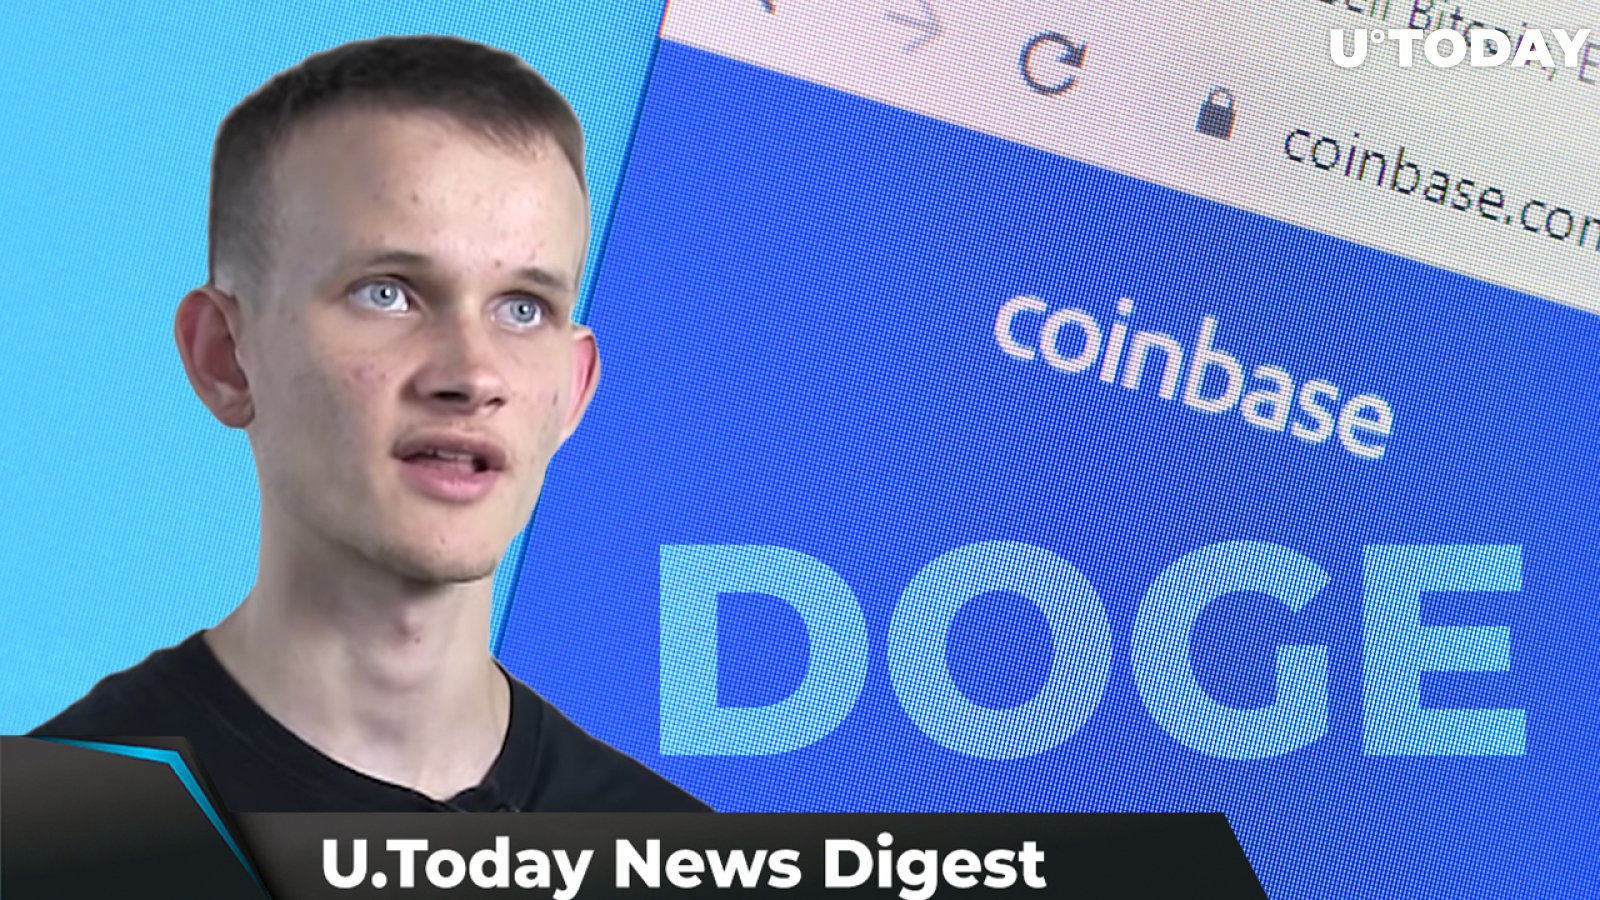 Coinbase Cloud Drops Terra, Vitalik Buterin Is Not a Billionaire Anymore, DOGE Co-Founder Makes Important Statement: Crypto News Digest by U.Today